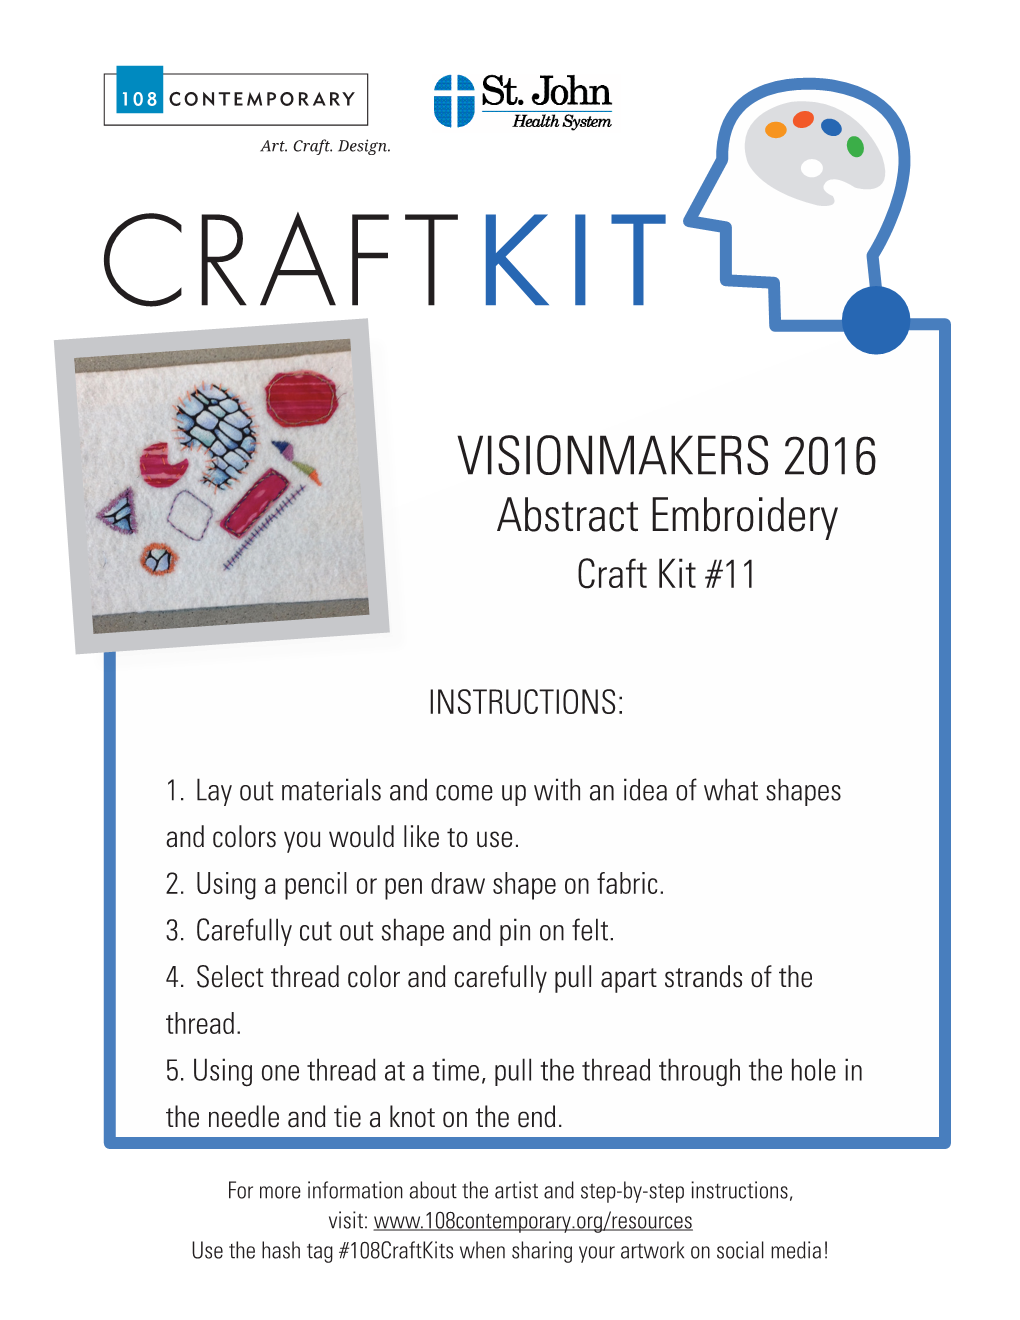 Abstract Embroidery Craft Kit #11